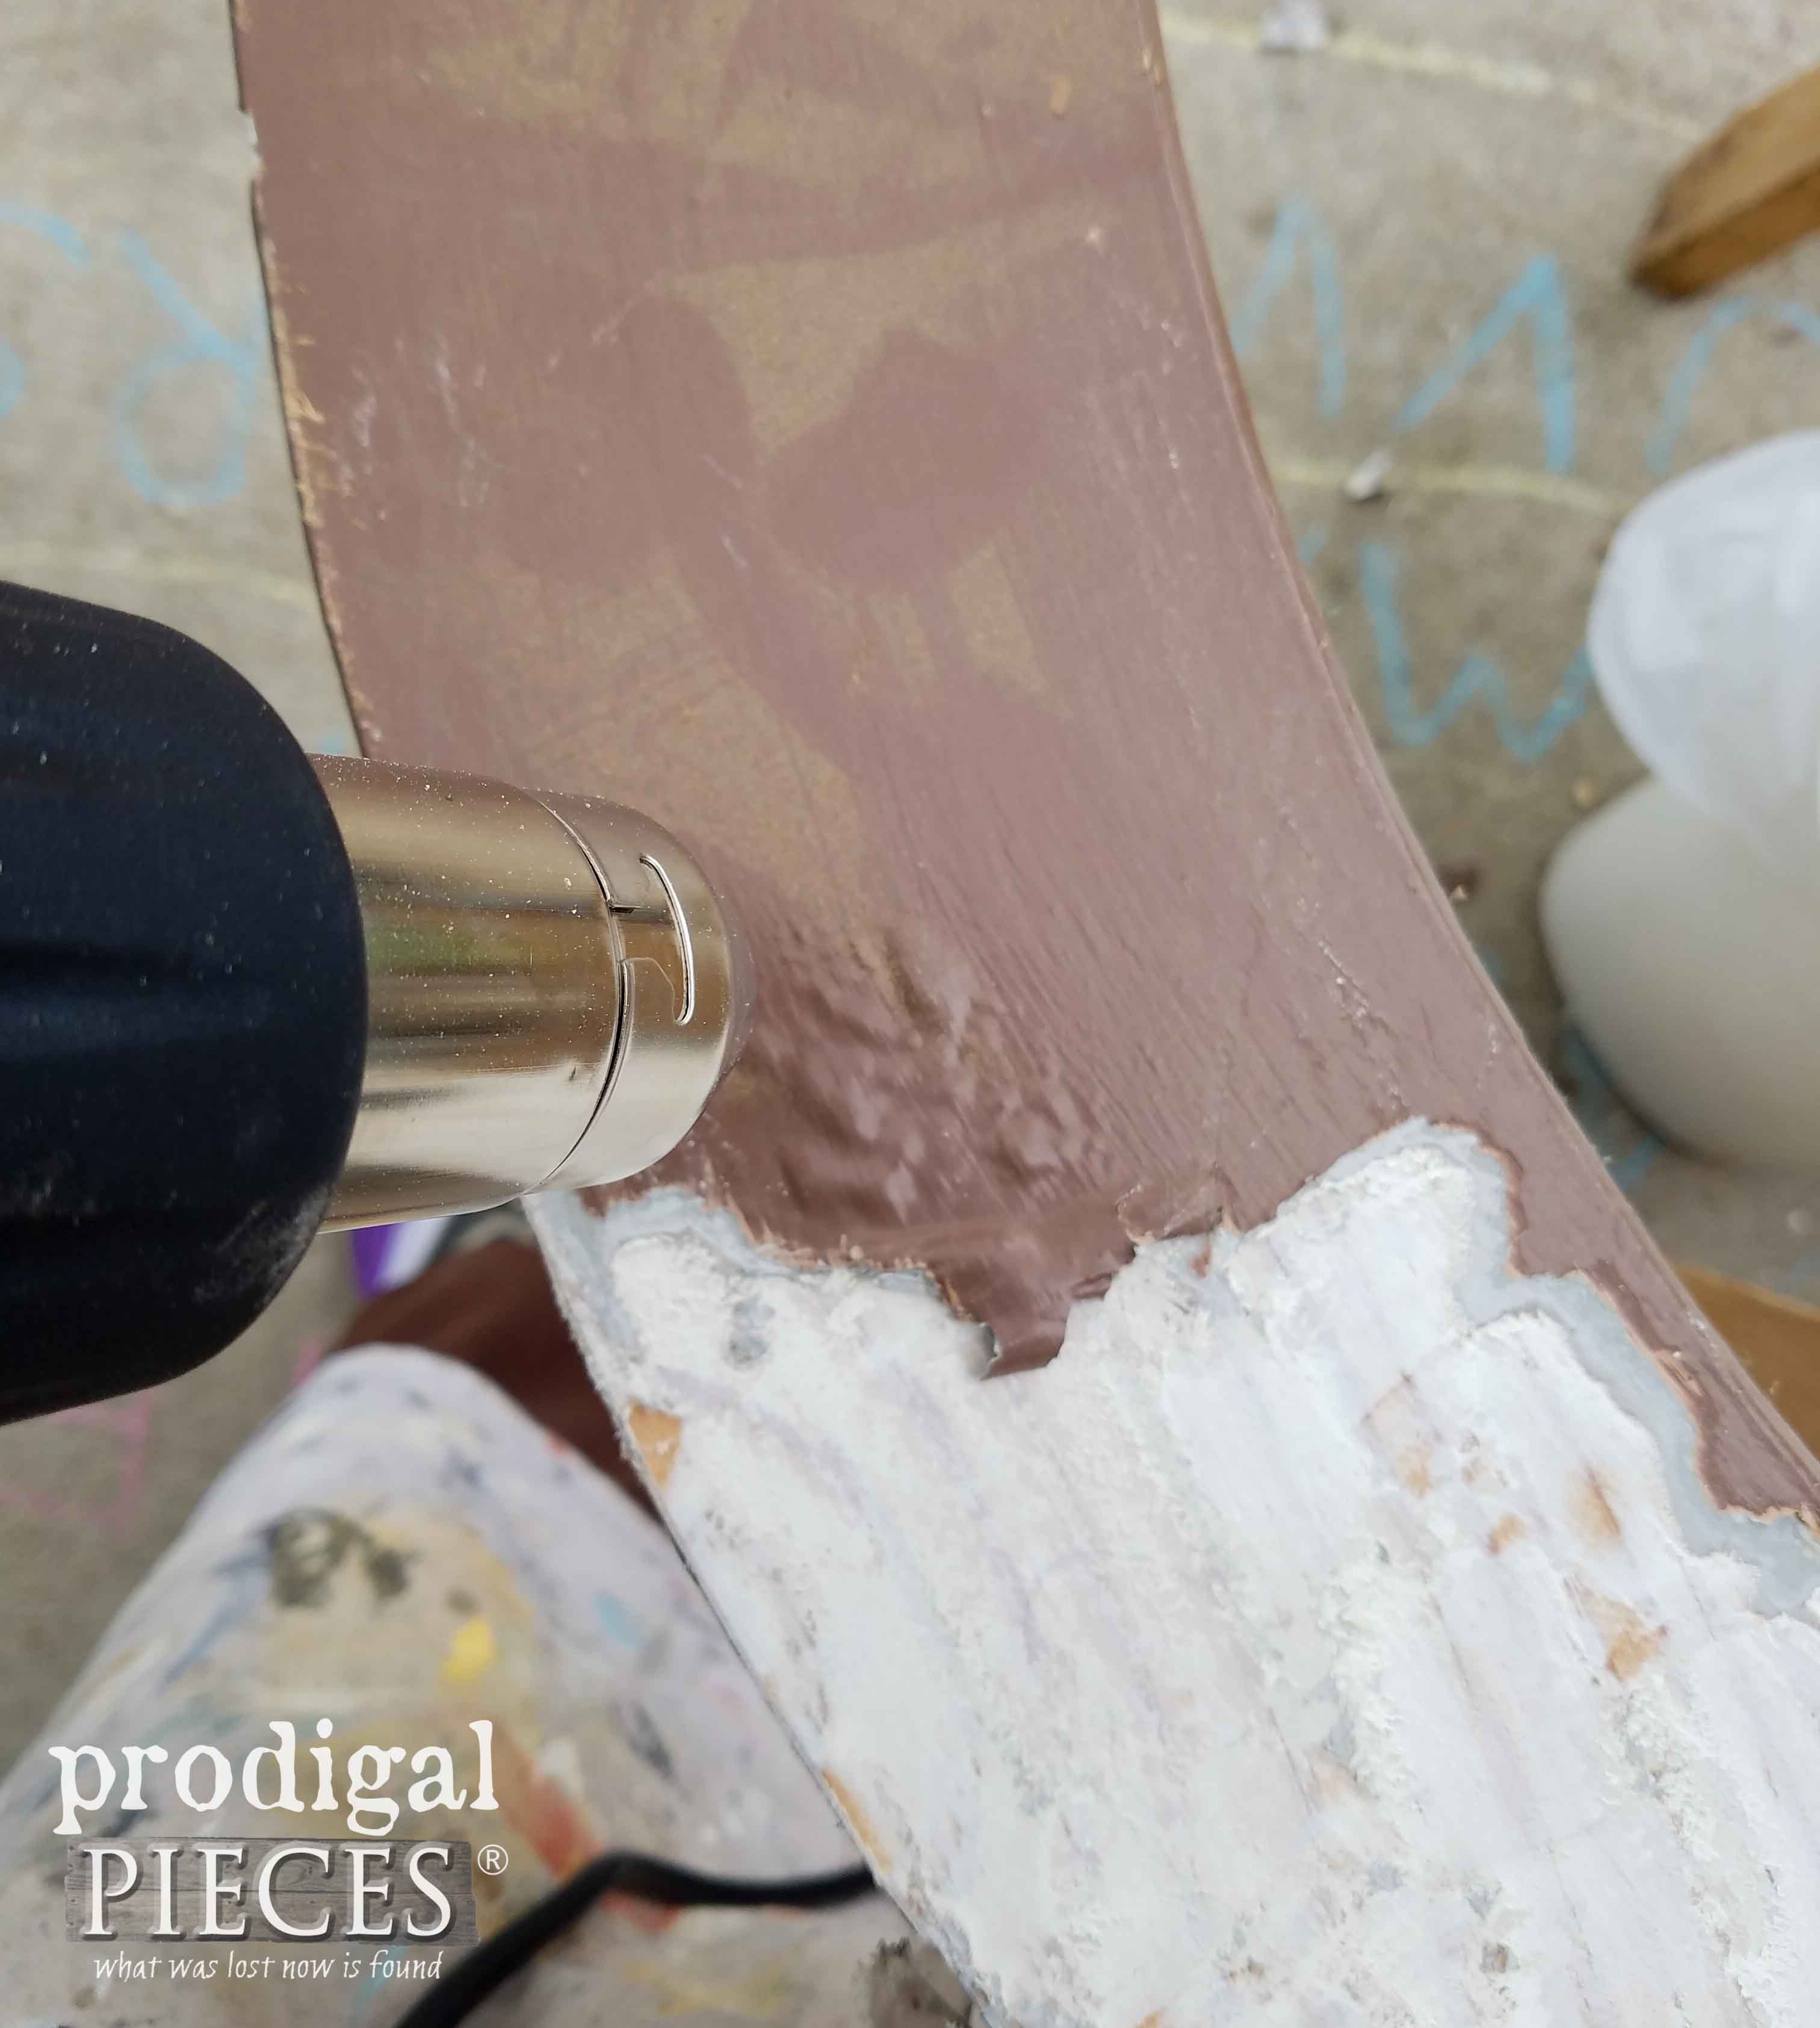 Bubbling Paint Using the HomeRight Digital Heat Gun by Prodigal Pieces | prodigalpieces.com